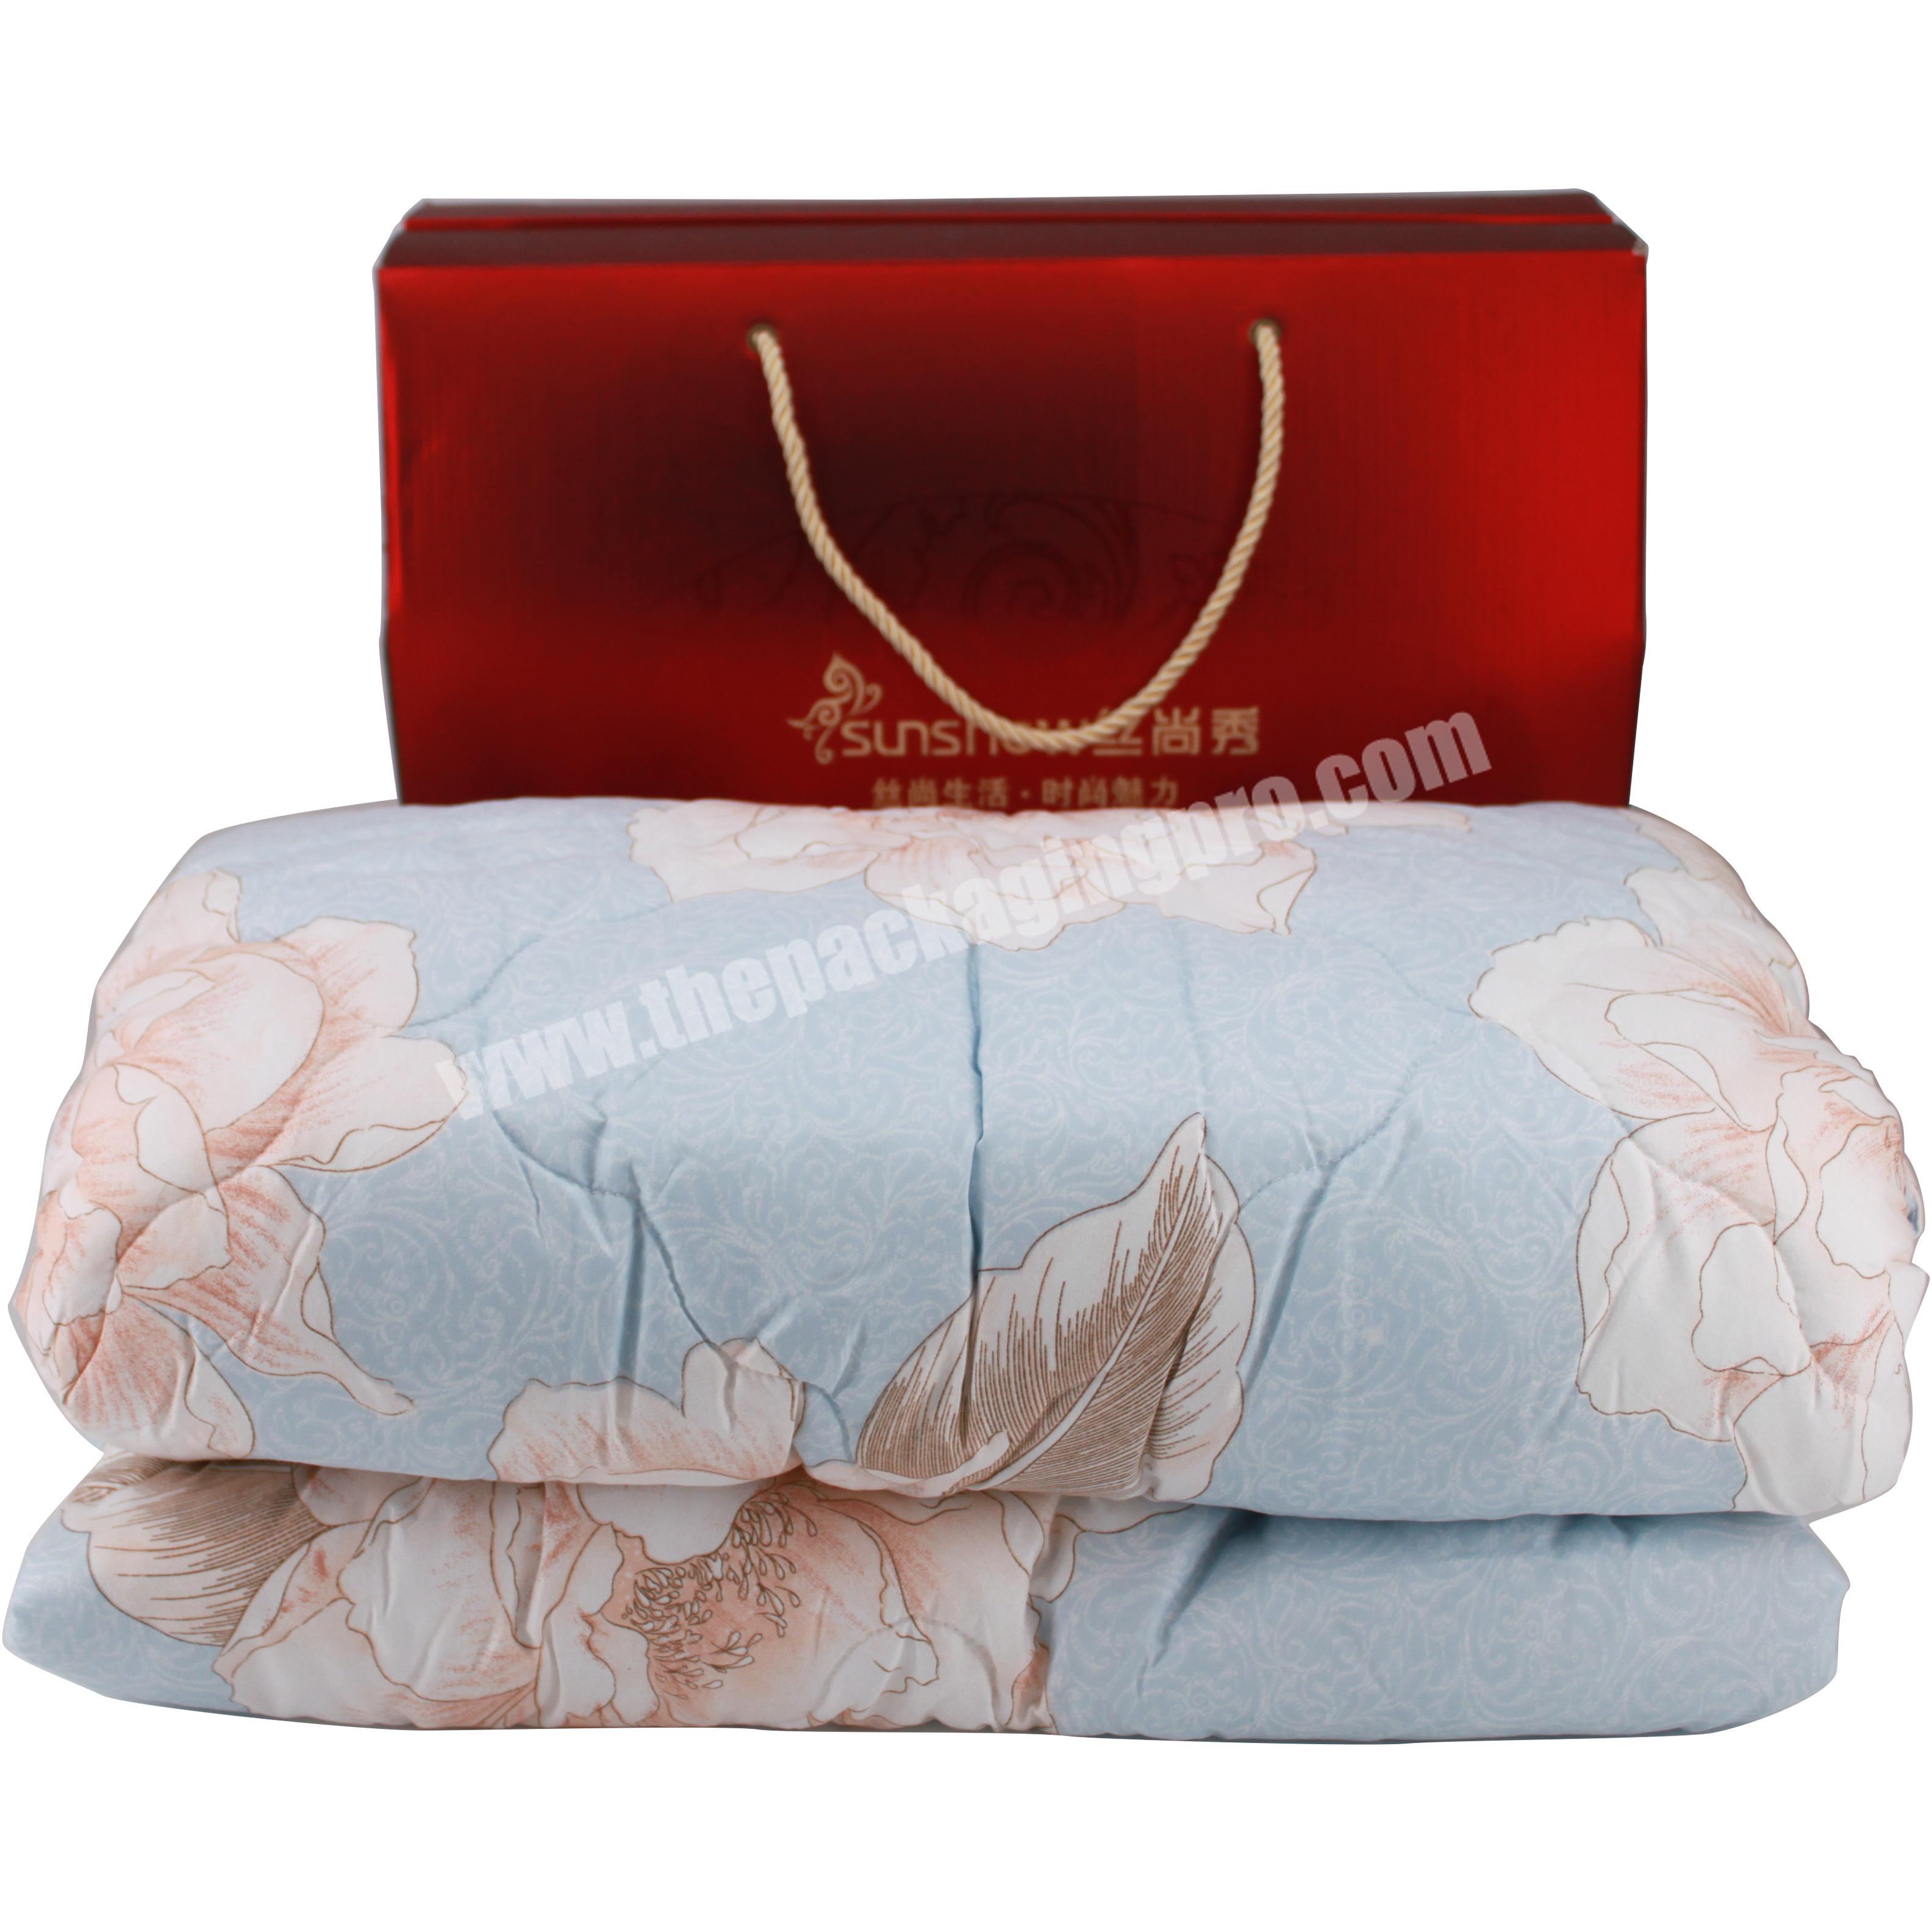 Design silk fabric quilt cover bedding set corrugated packaging box with rope handle